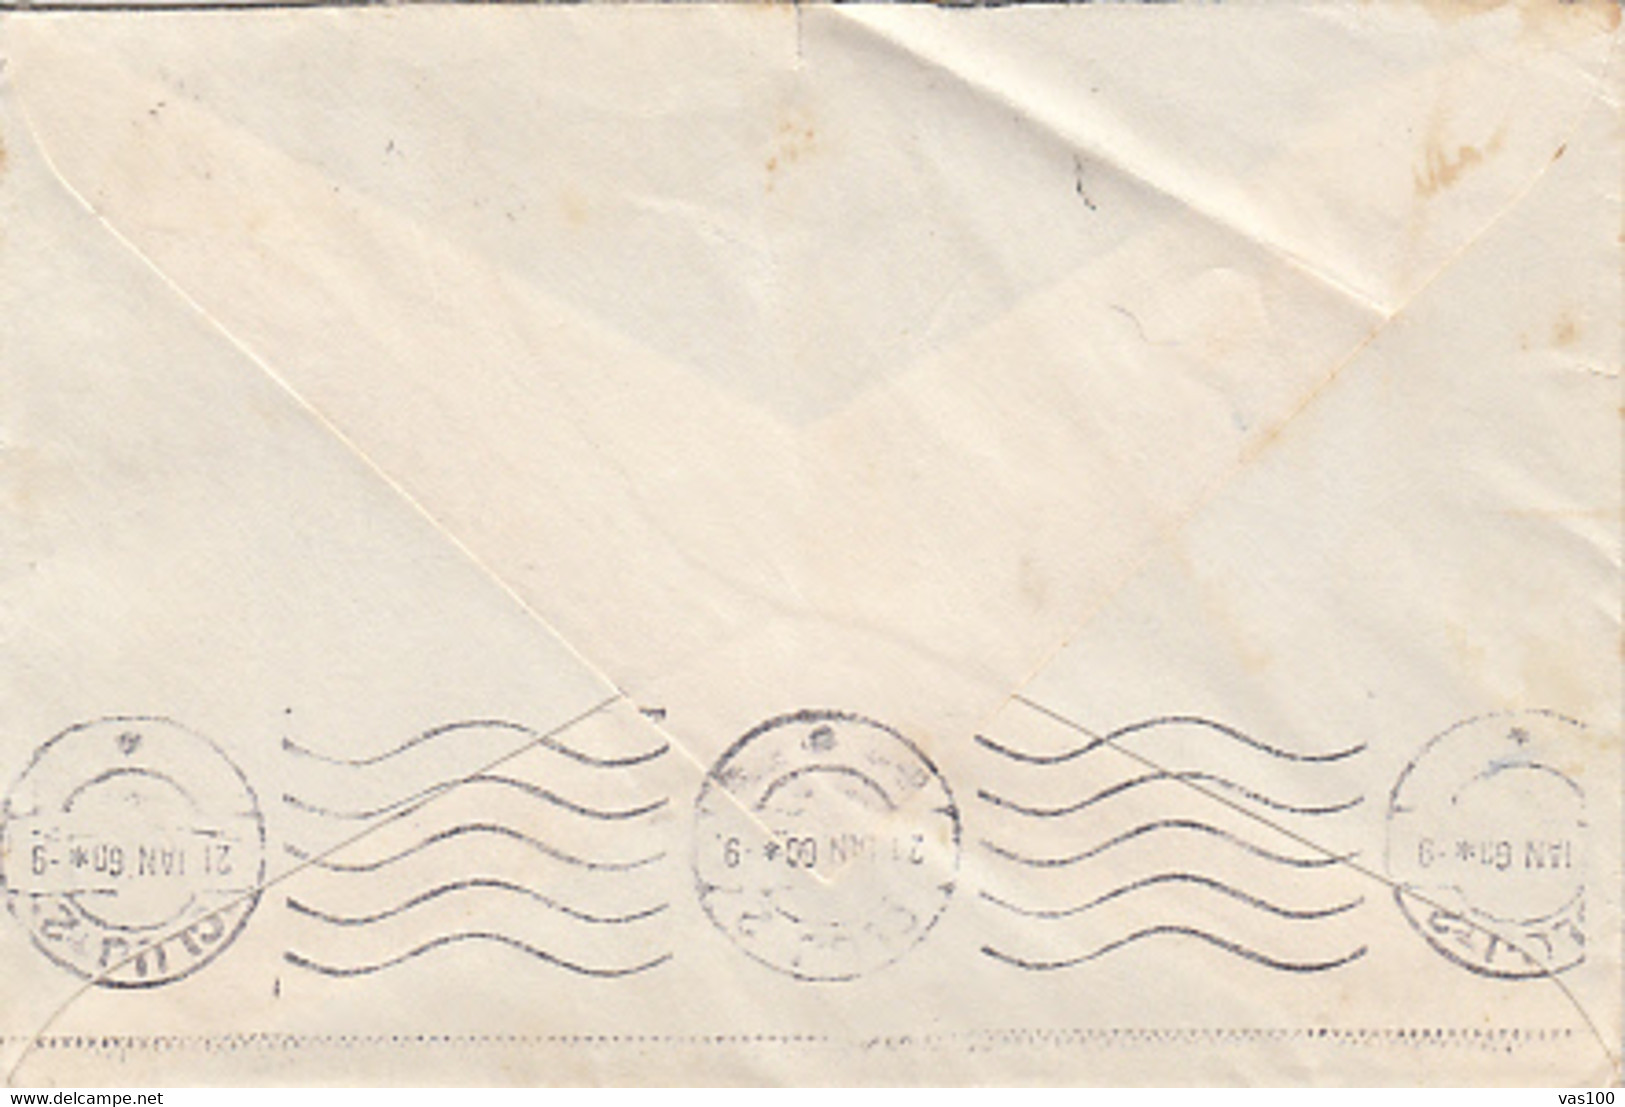 MAIZE, CORN STAMP, WAVY LINES CANCELLATIONS ON COVER, 1960, ROMANIA - Covers & Documents